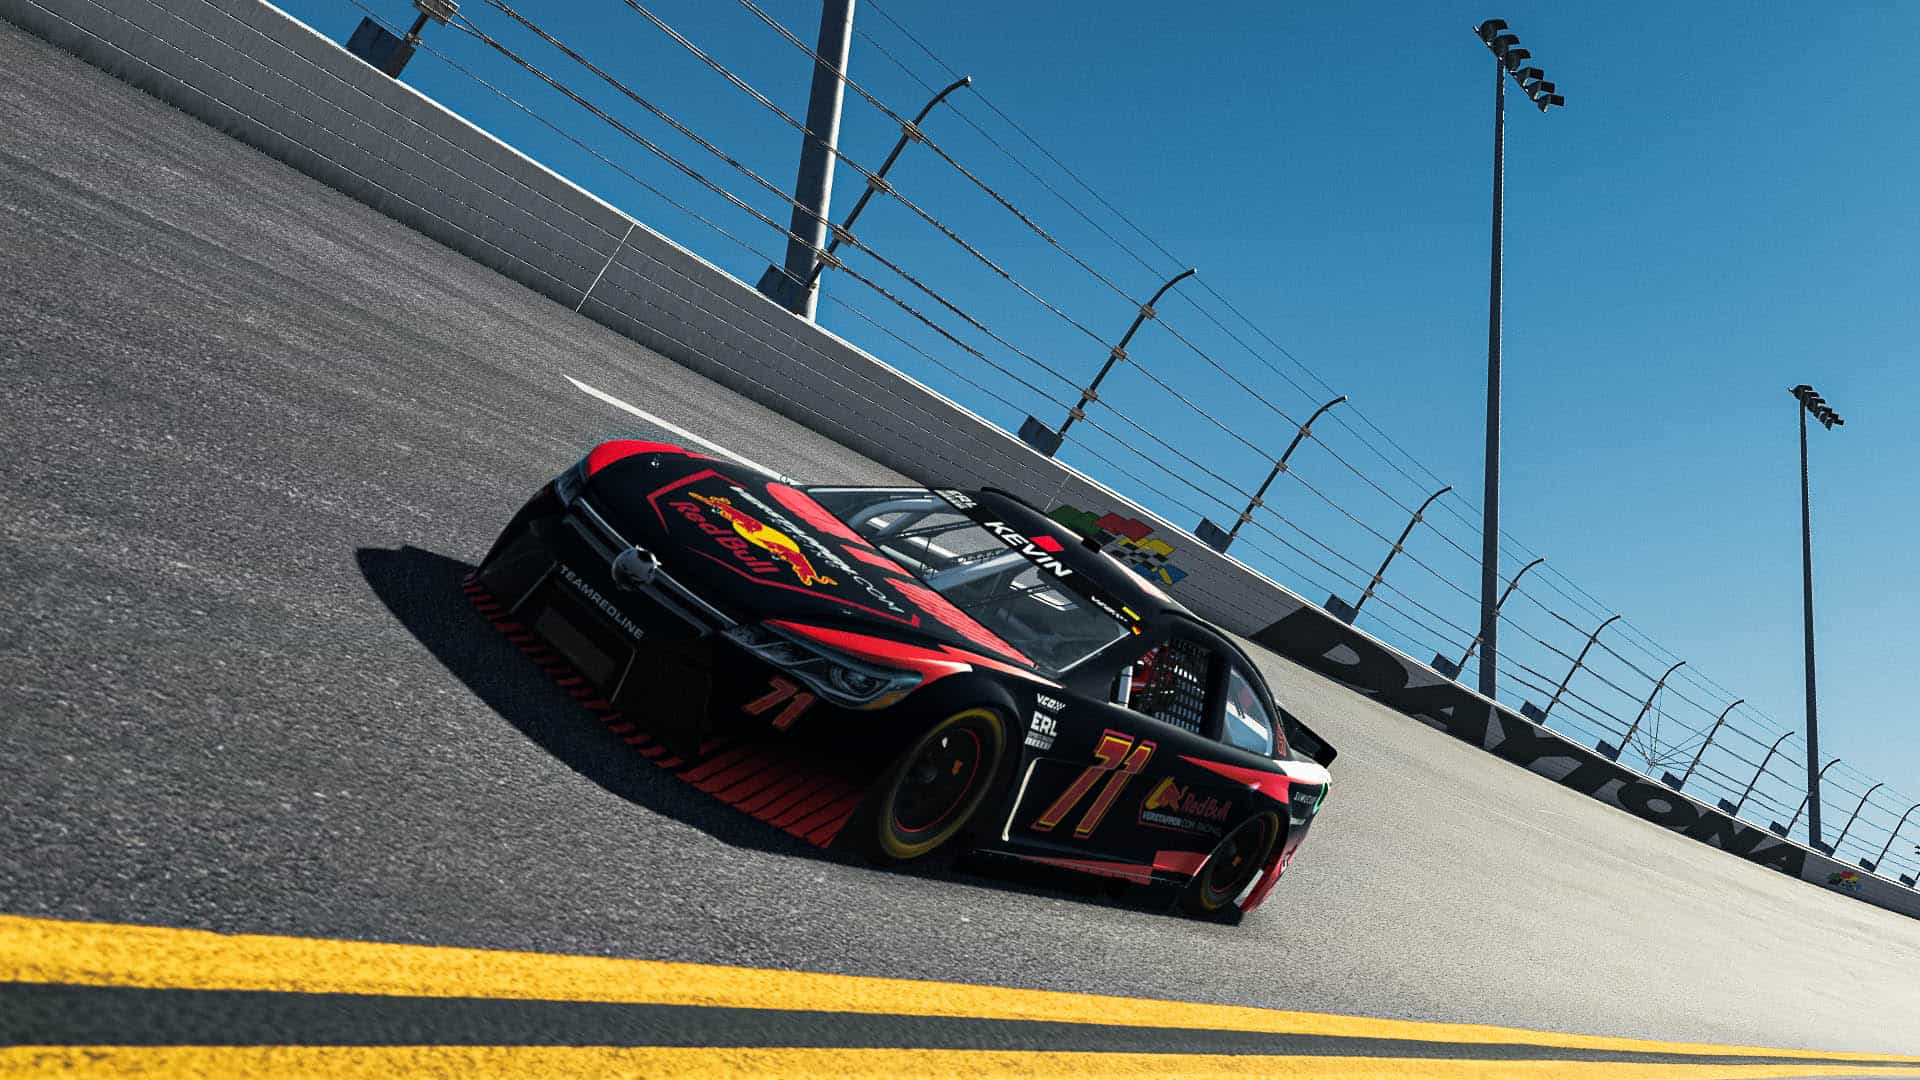 VCO ERL Fall Cup - Team Redline finally breaks victory duck through rFactor 2